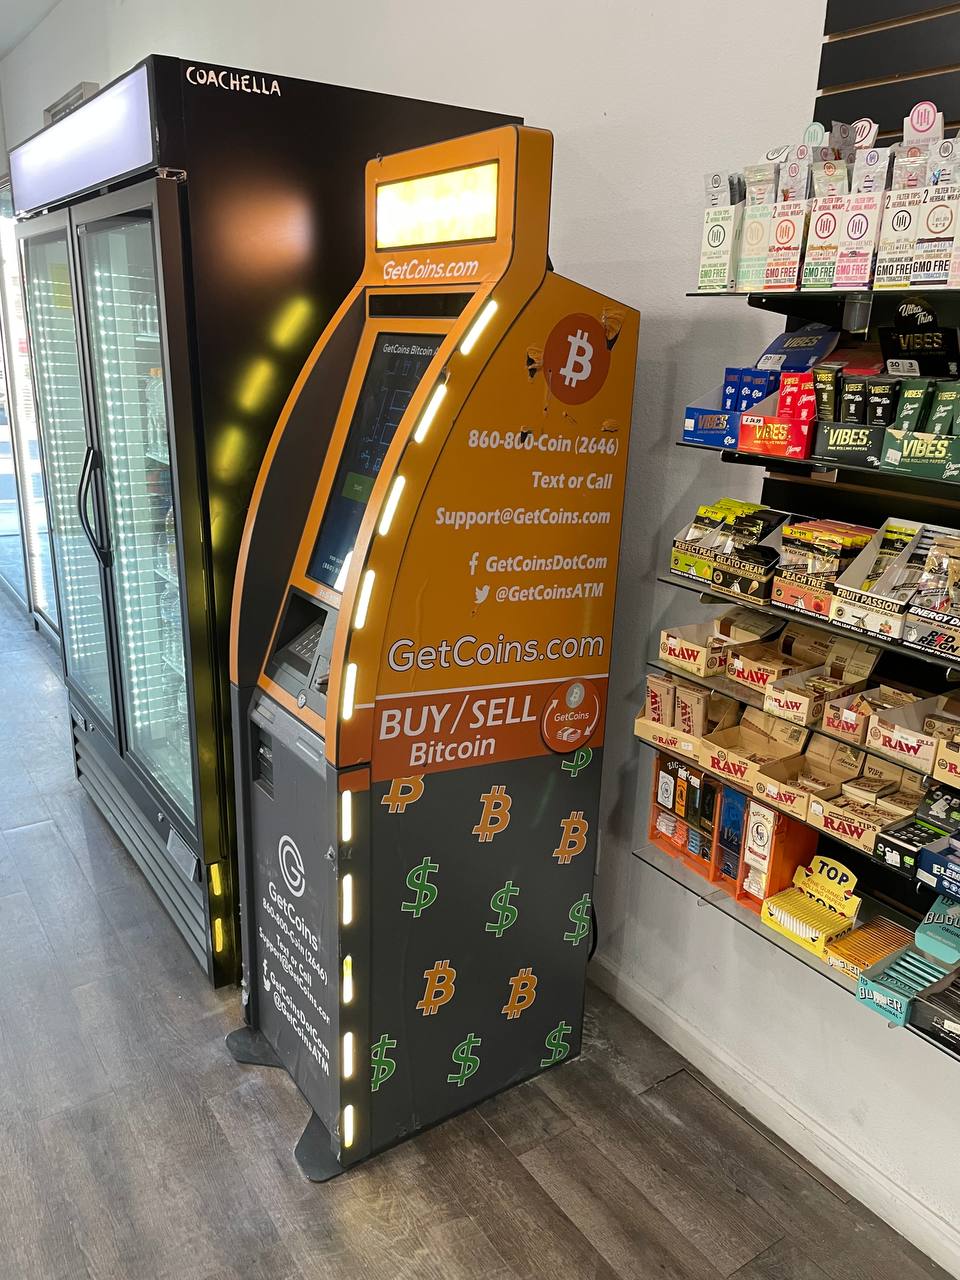 Getcoins - Bitcoin ATM - Inside of Aladdin's Smoke Shop in Cathedral City, California